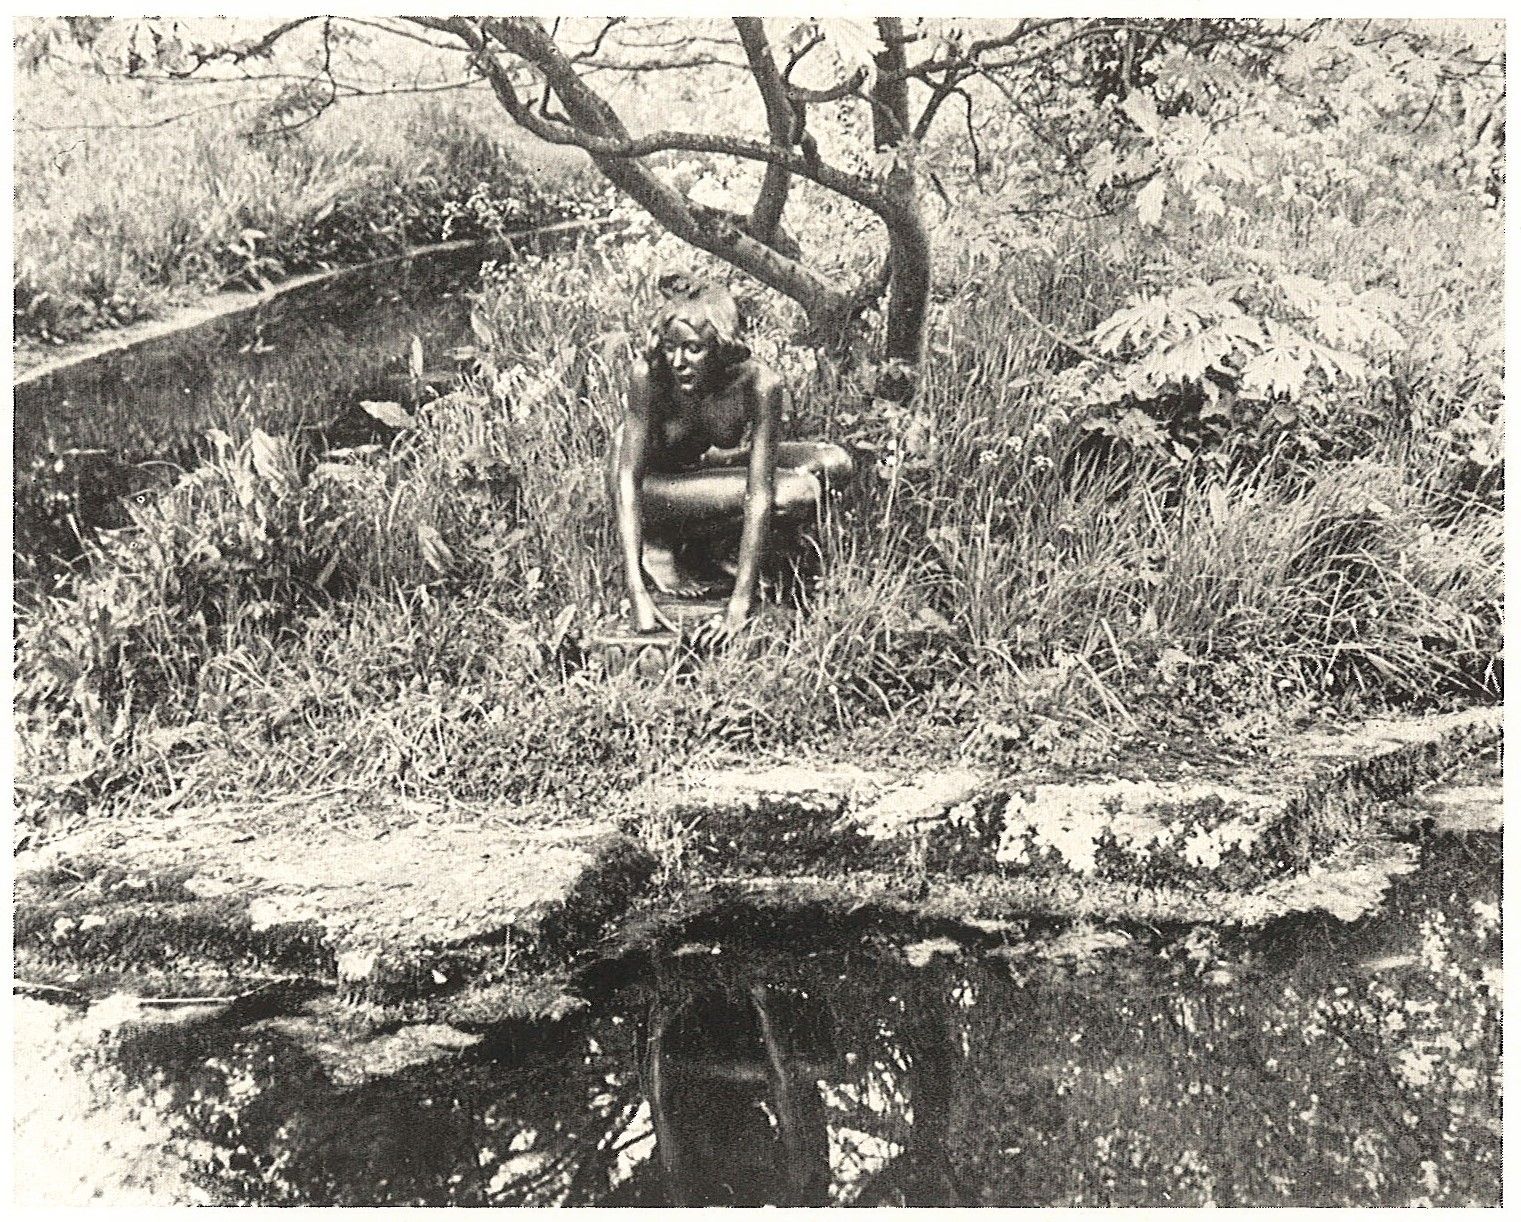 The Elf by Sir William Goscombe John in the grounds of St Fagans circa 1948-49